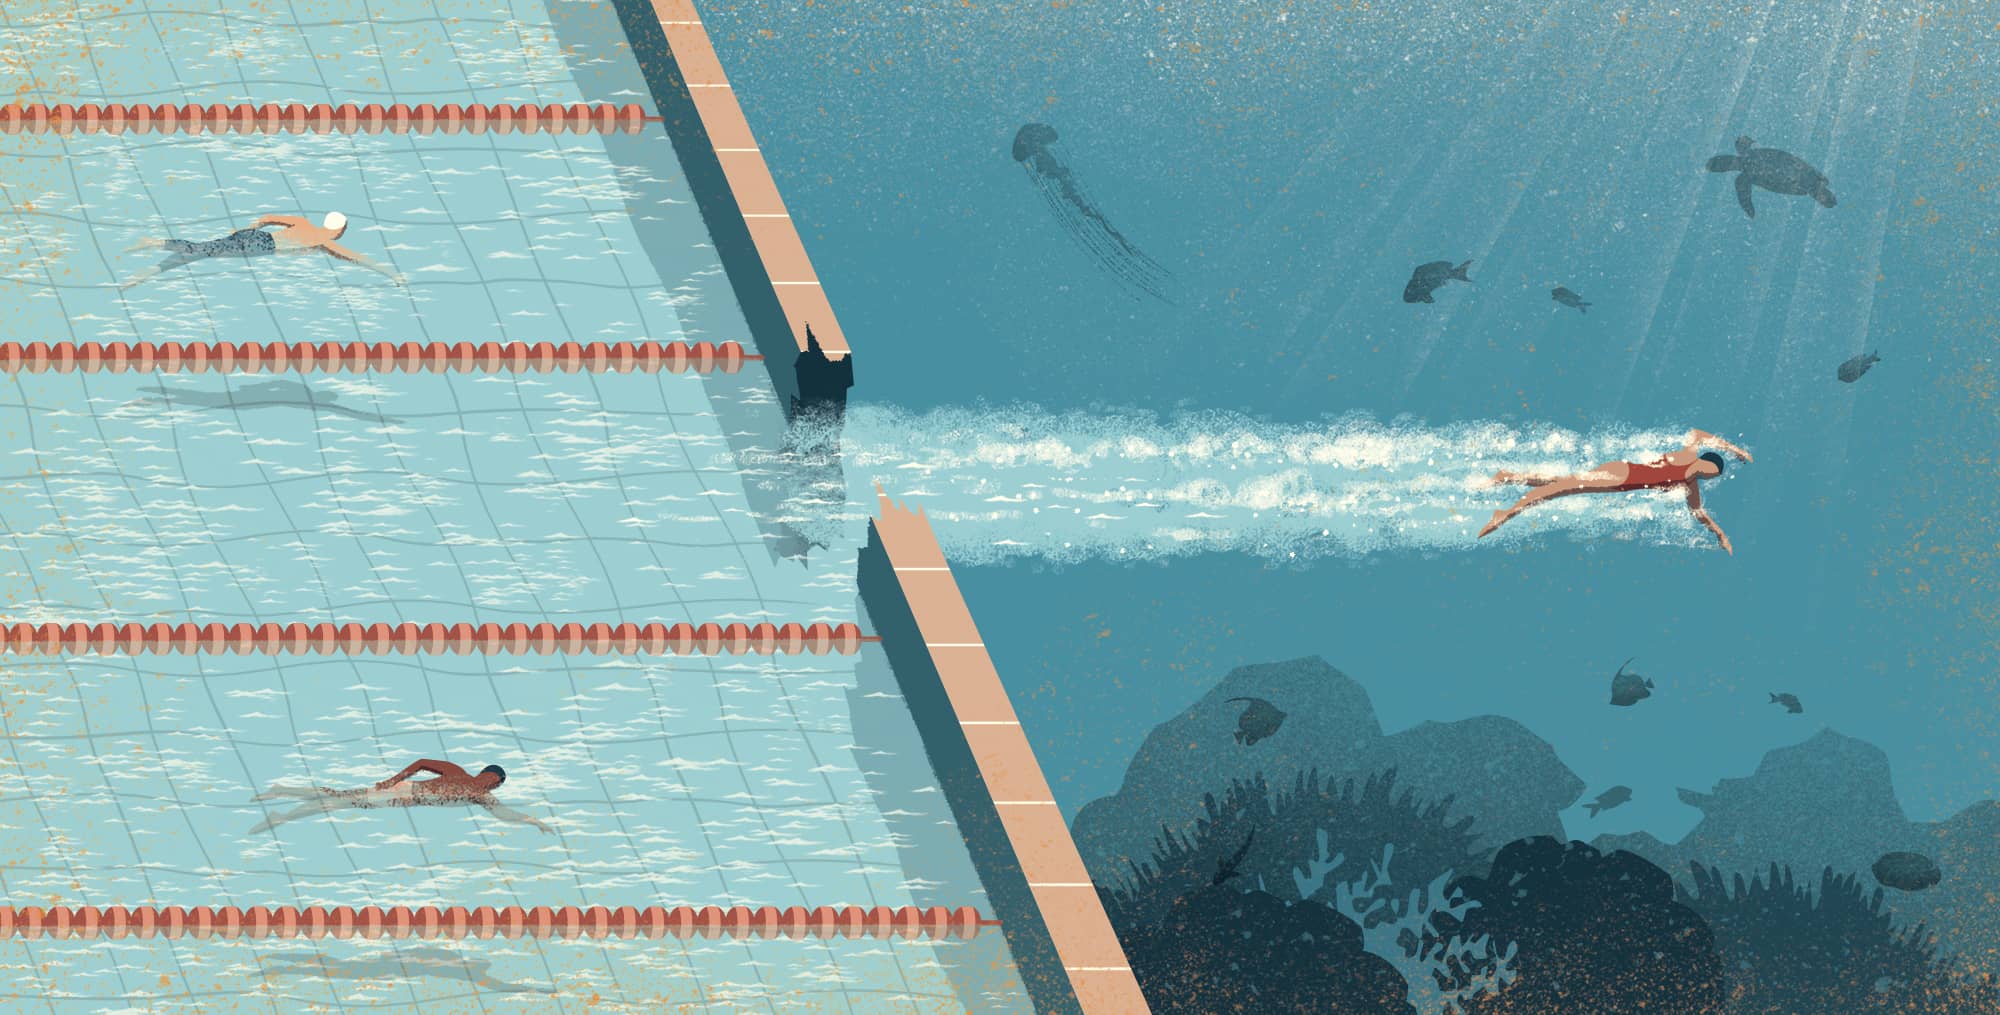 Illustration of a person swimming in a pool and breaking through the wall and swimming in the ocean. Illustration by Davide Bonazzi, Conceptual, 